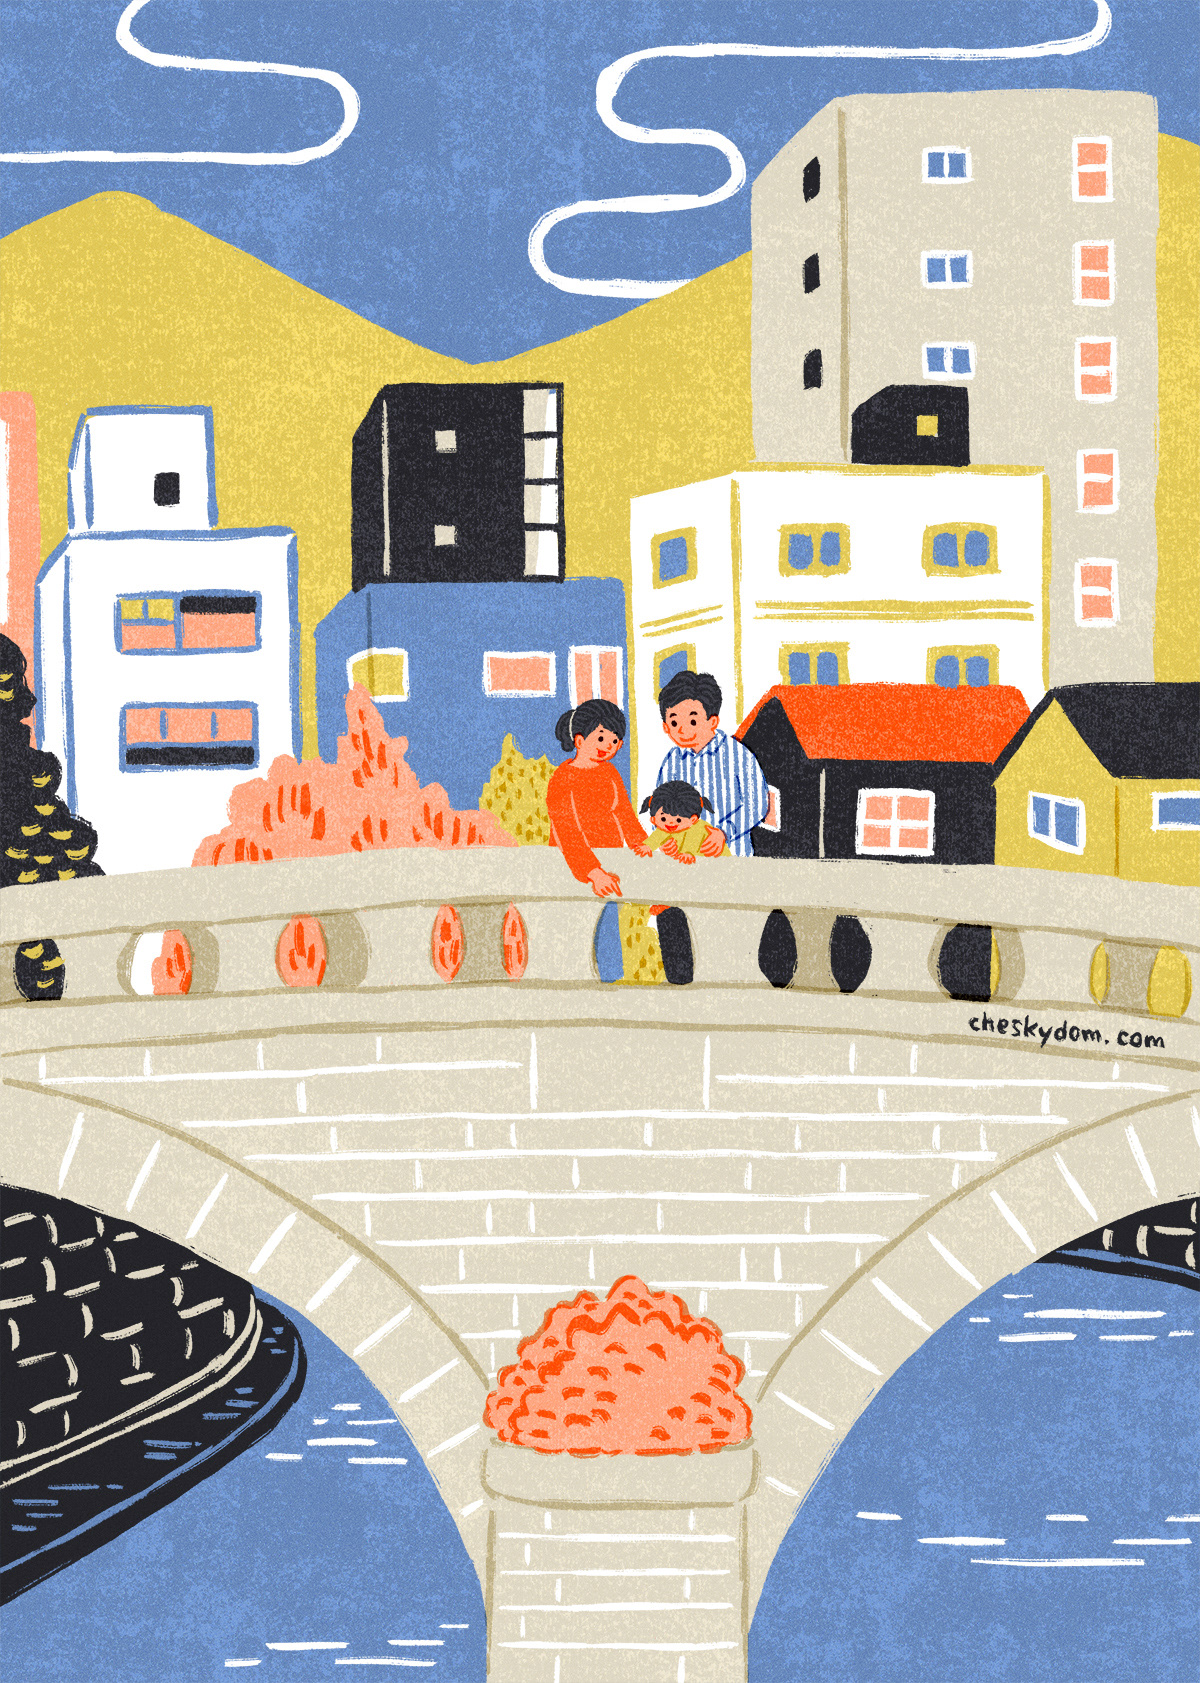 The illustration of a family at a famous bridge in Japan.